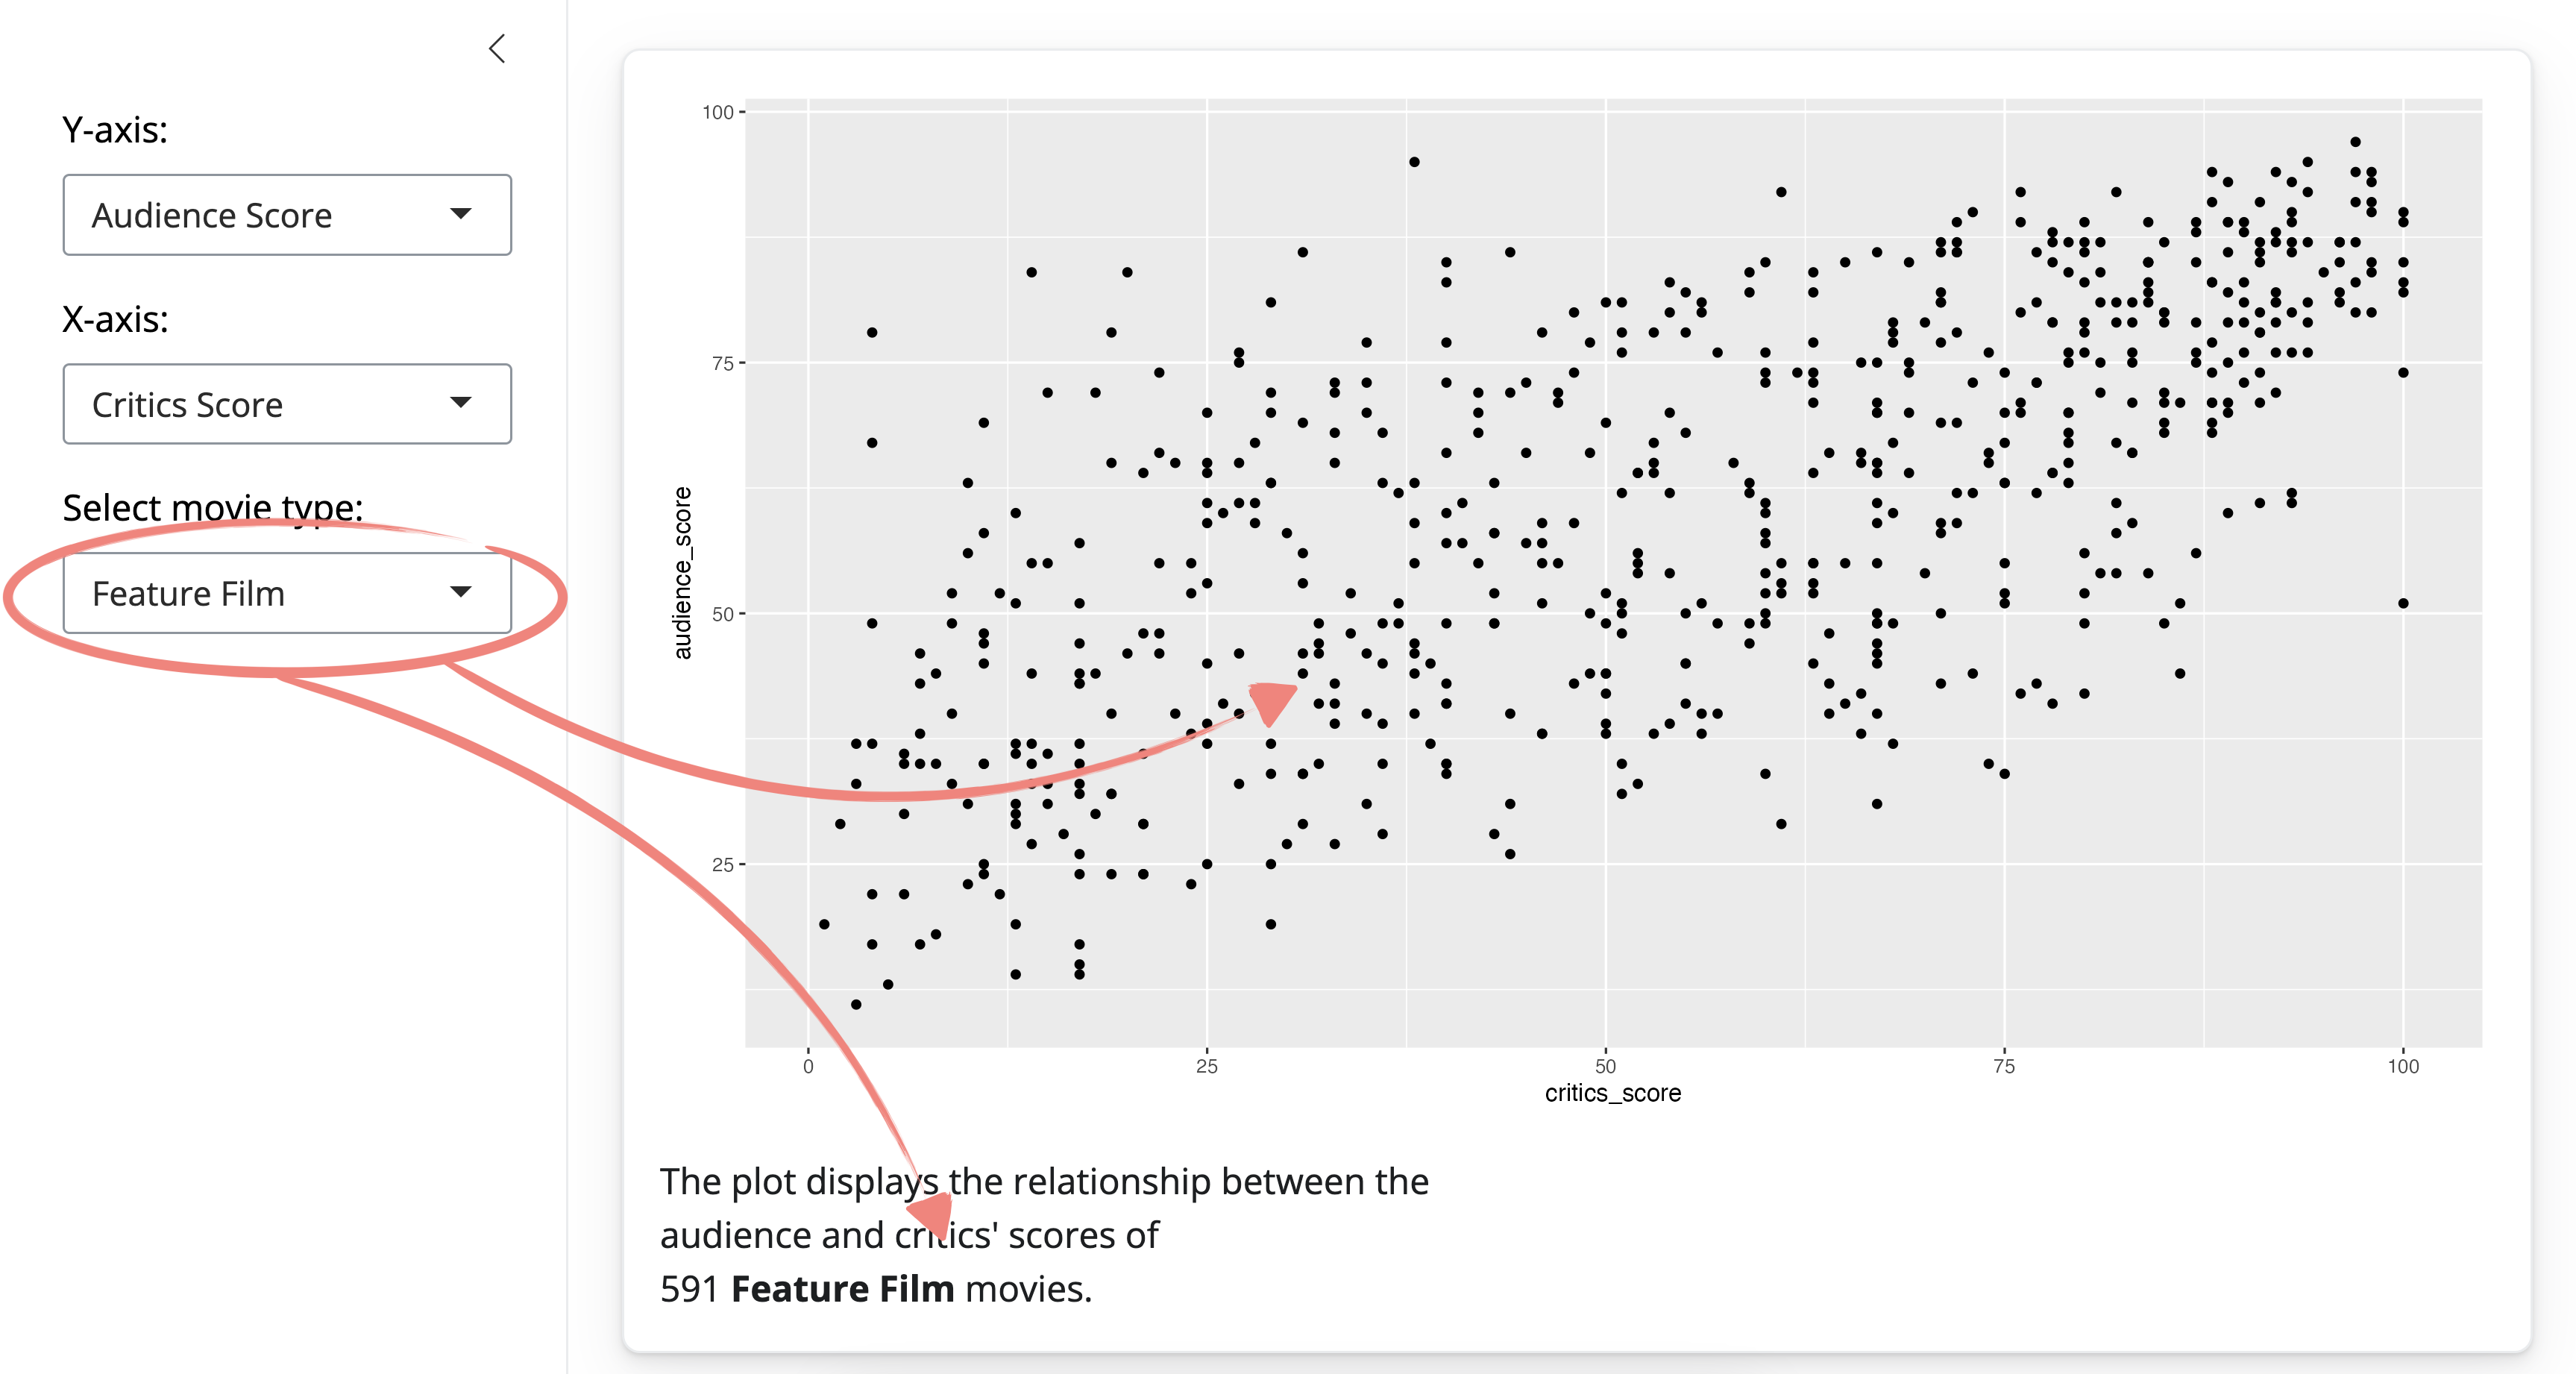 Our Shiny app with another option 'Select movie type:' with 'Feature Film' selected, in the left panel. The 'Select movie type:' is circled and an arrow points to the points in the scatterplot and text saying 'The plot displays the relationship between the audience and critics scores of 591 Feature Film movies.'